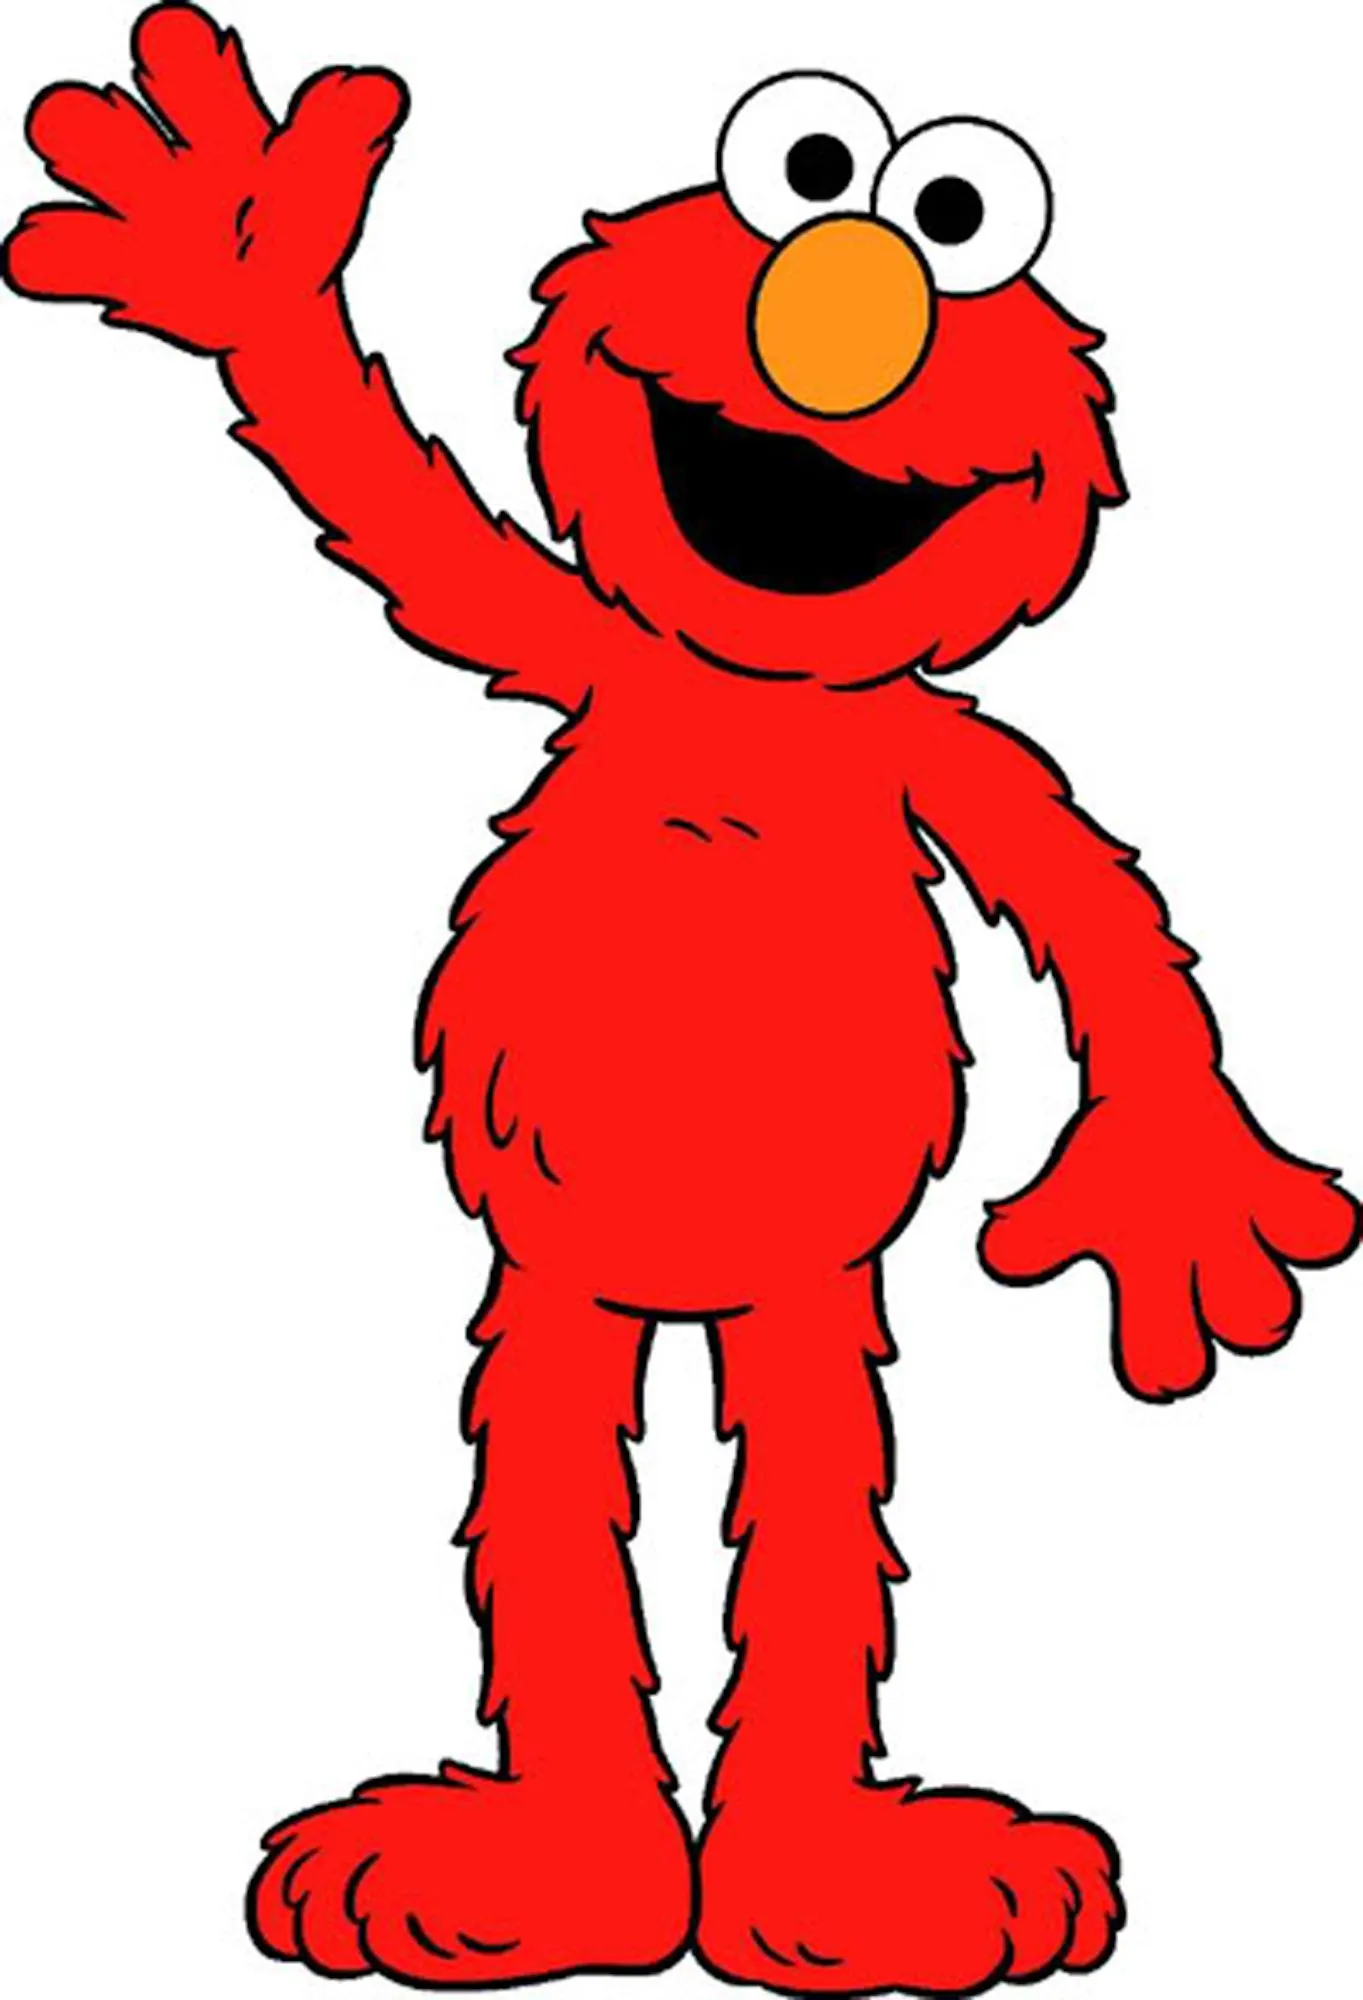 Images For > Elmo Face Png